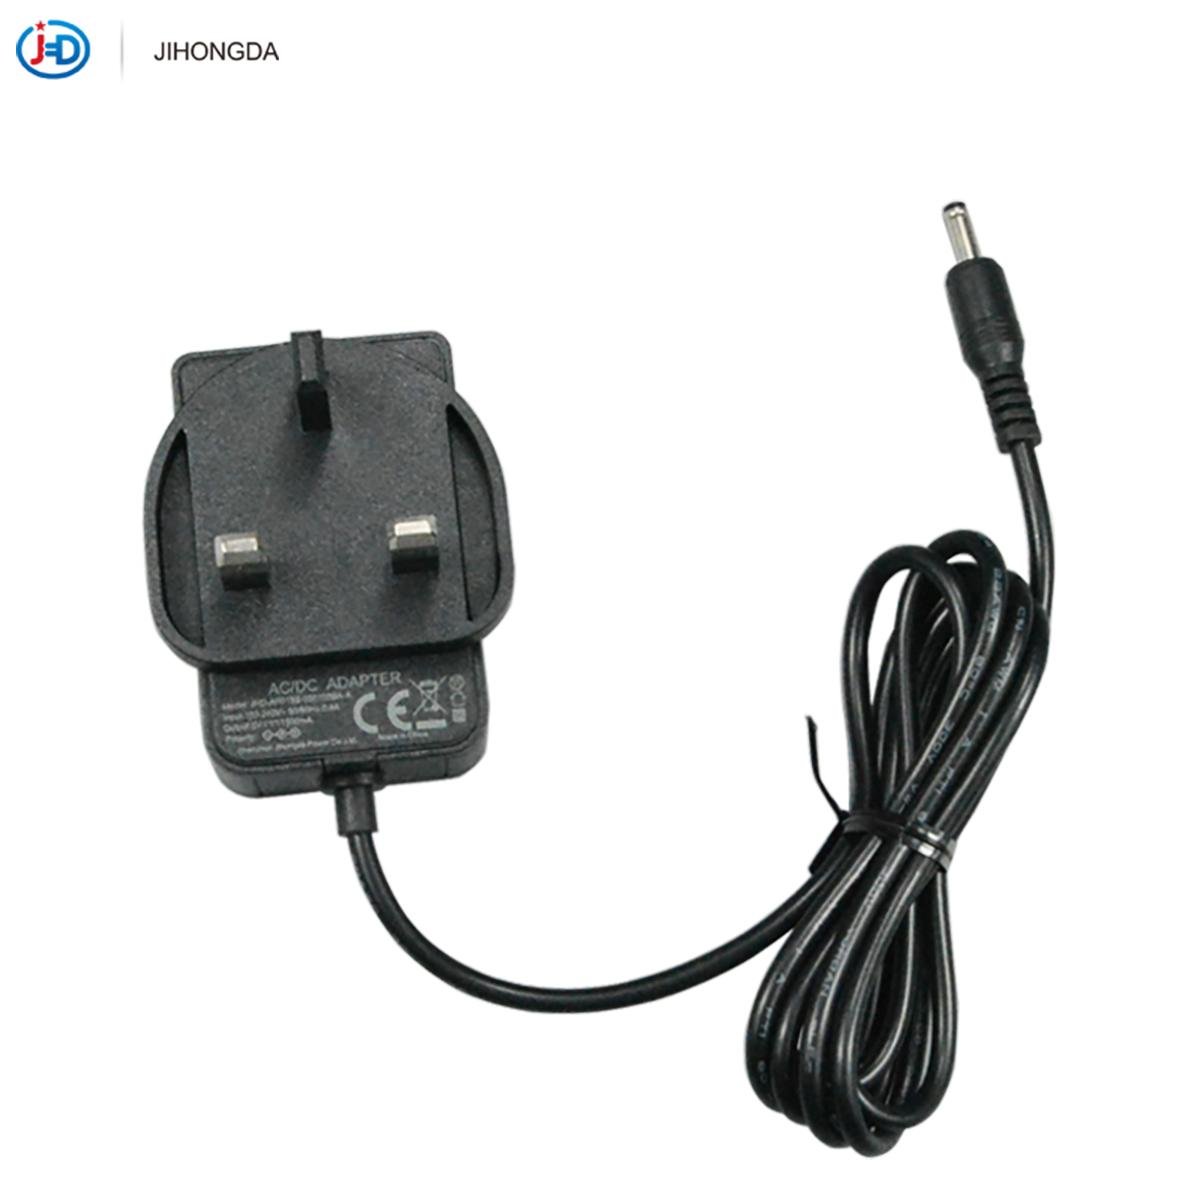 5V2A-2.5A Switching Power Adapter with CE UKCA 4